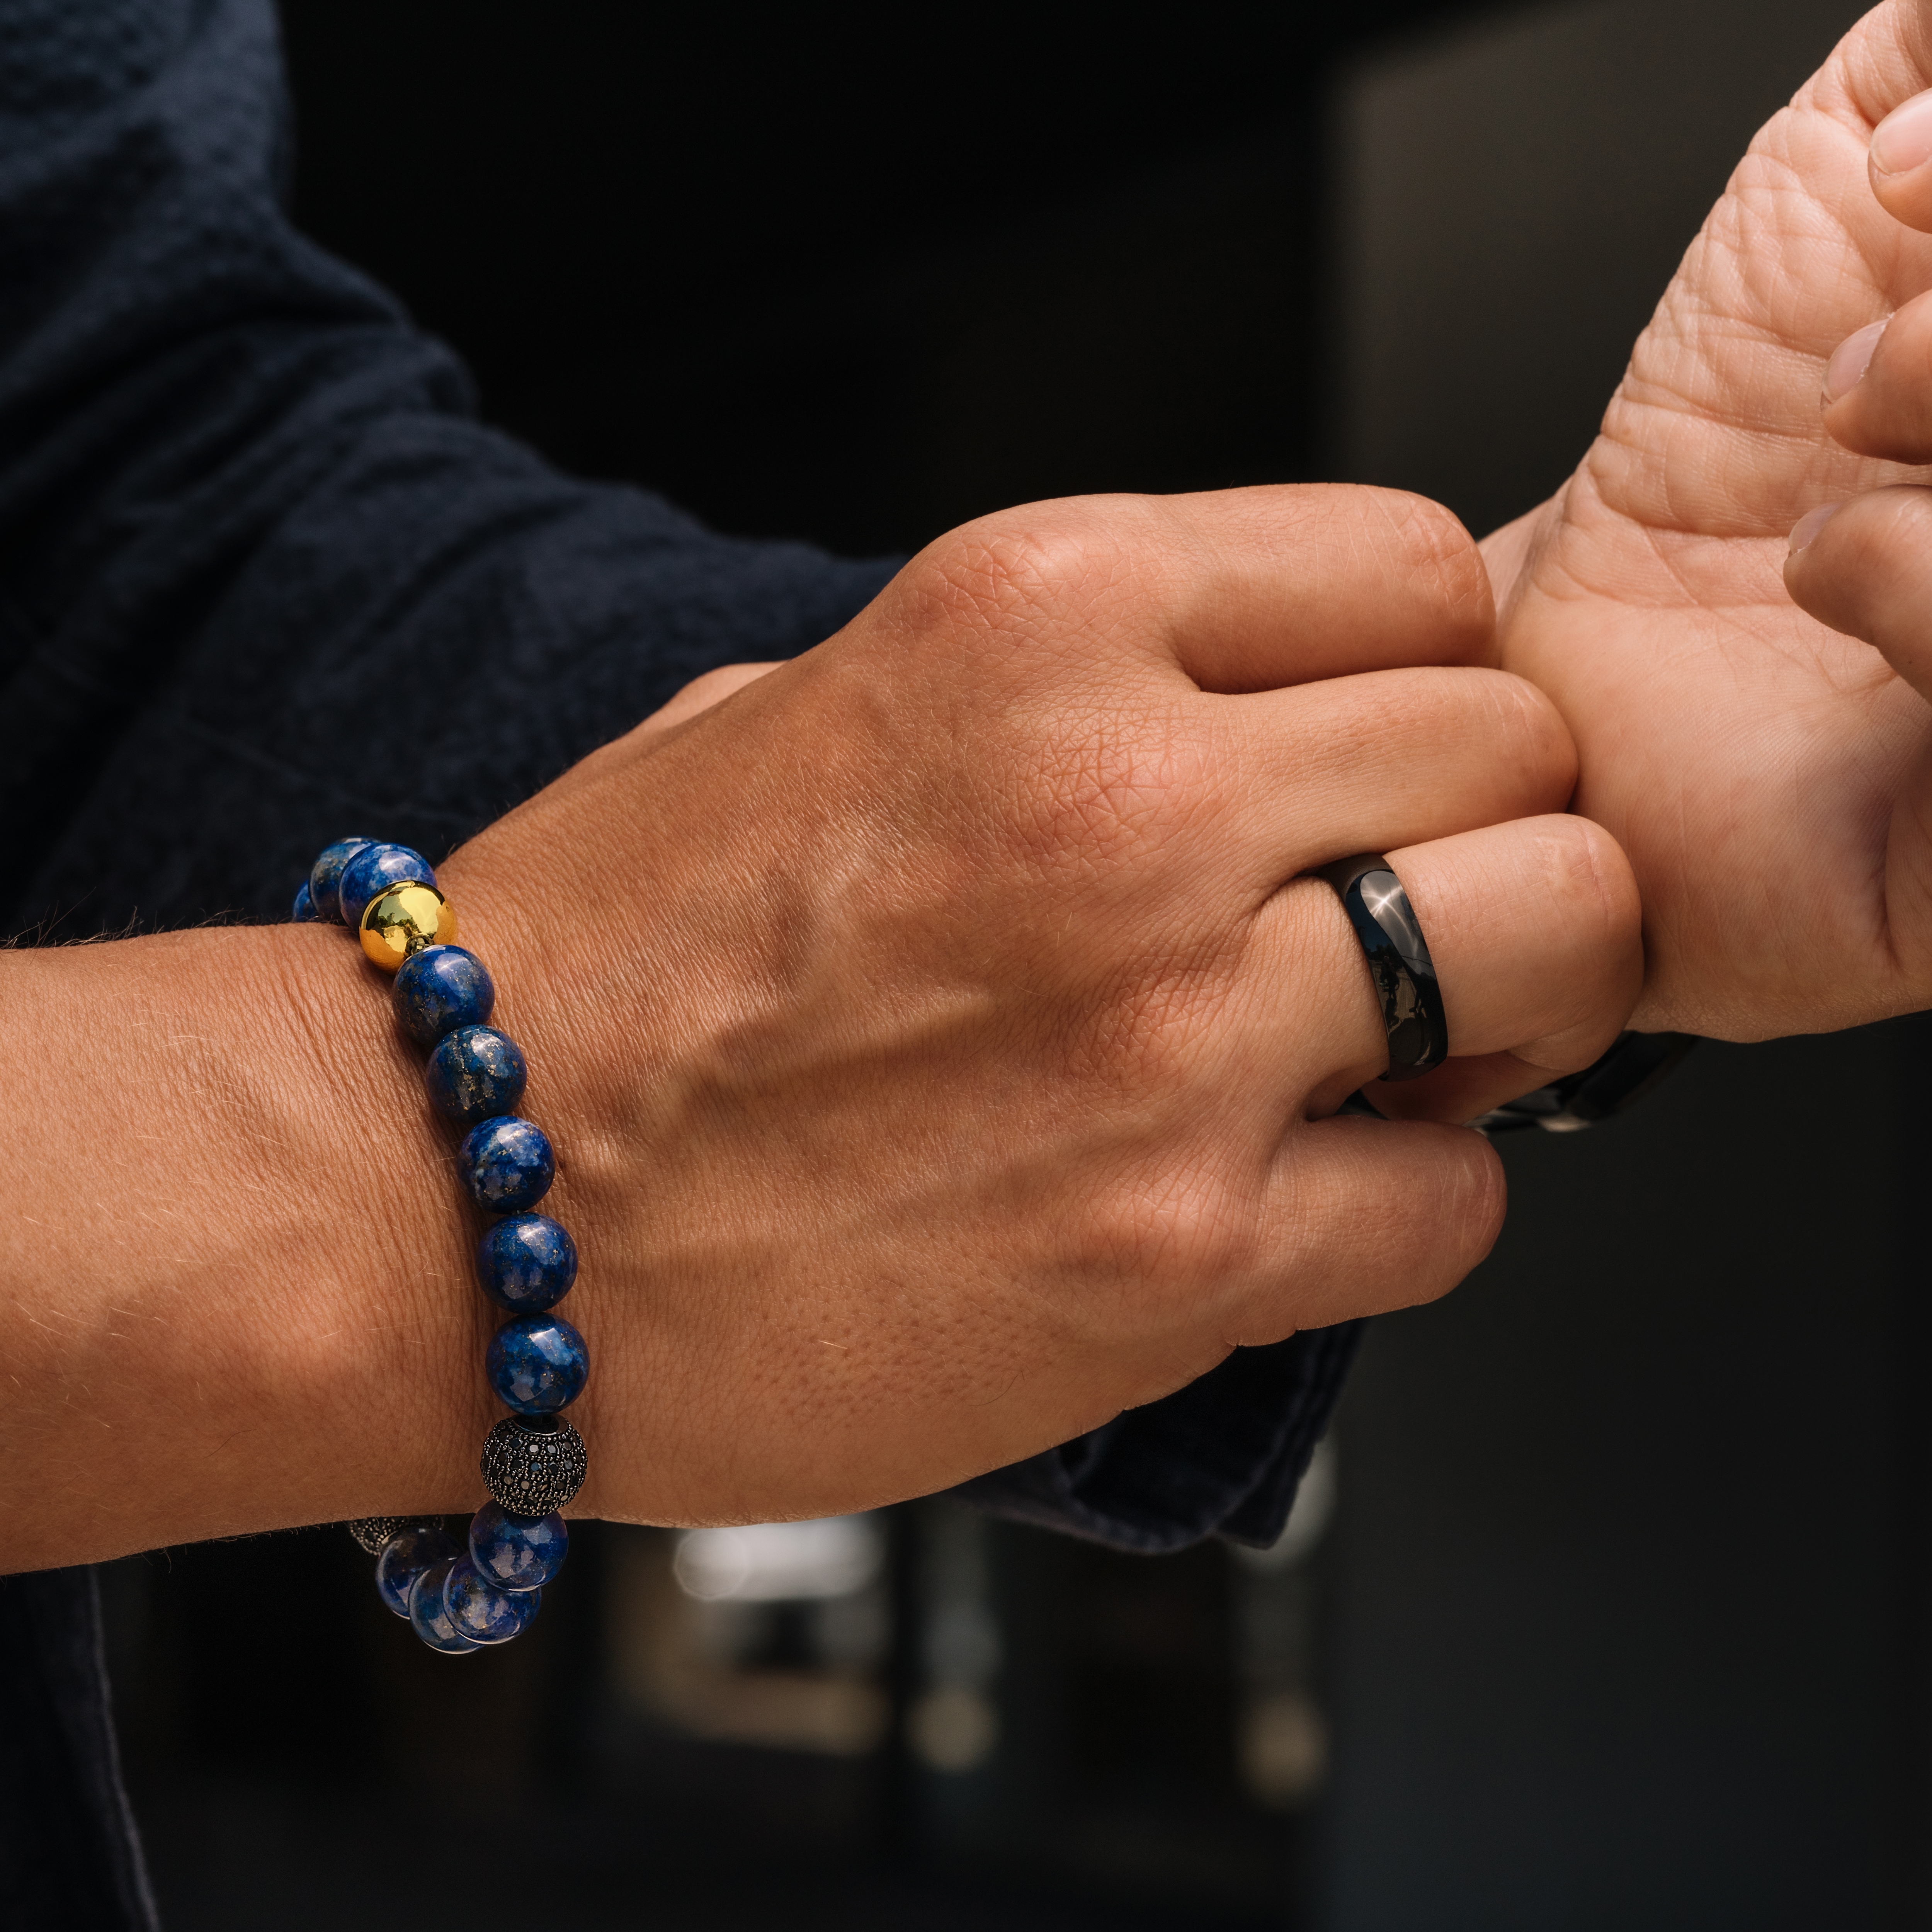 How to Wear Men's Bracelets – Without Overdoing It